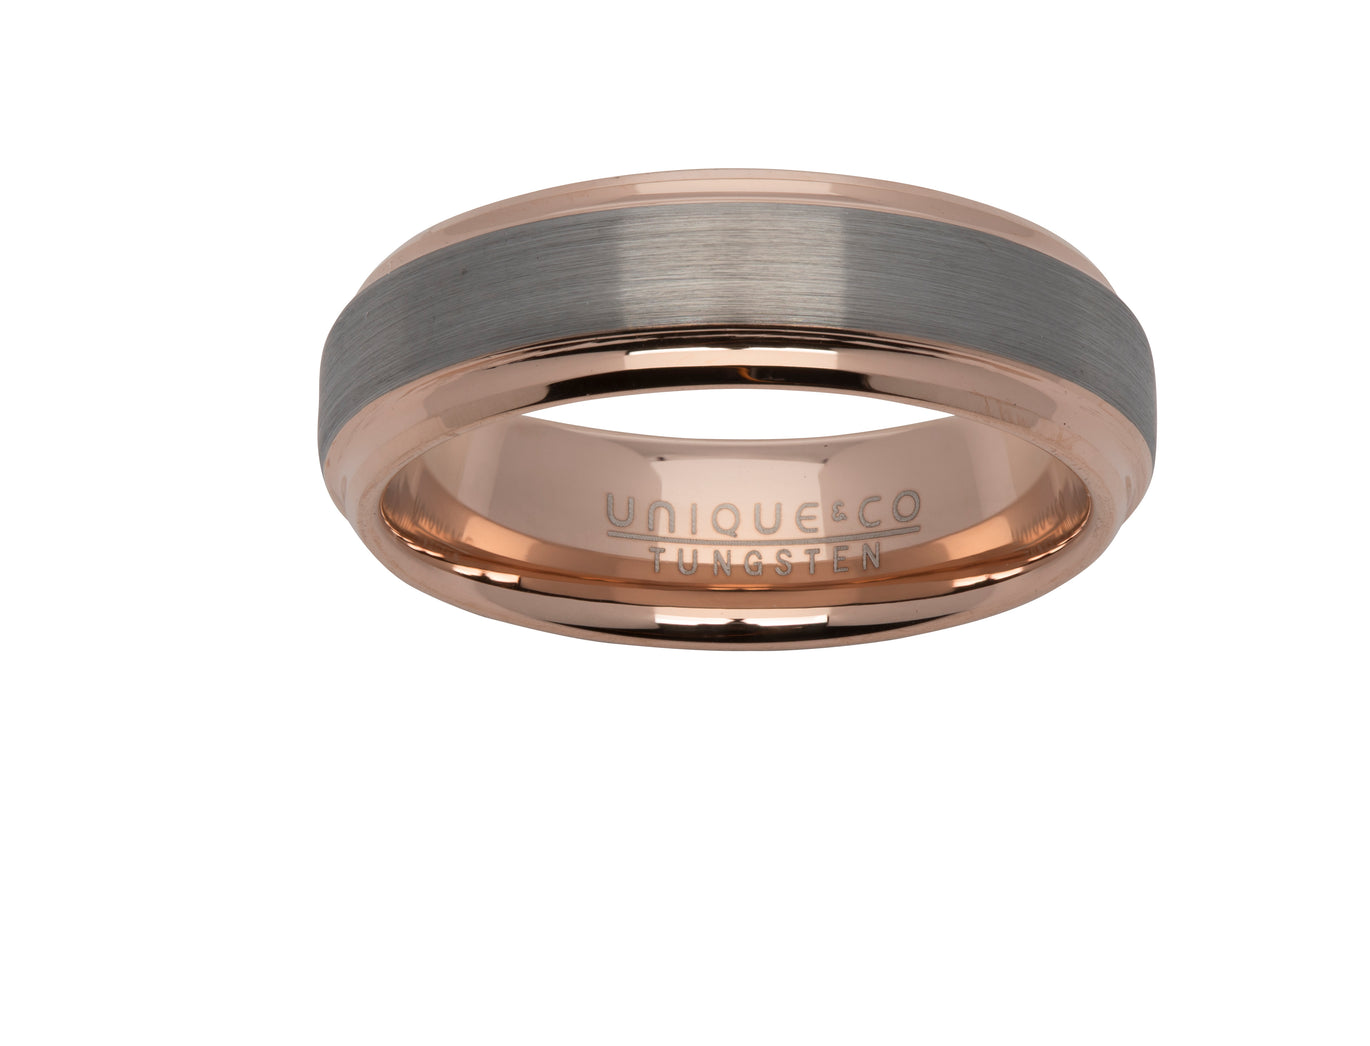 Unique & Co Rose Gold Plated Tungsten Carbide Ring